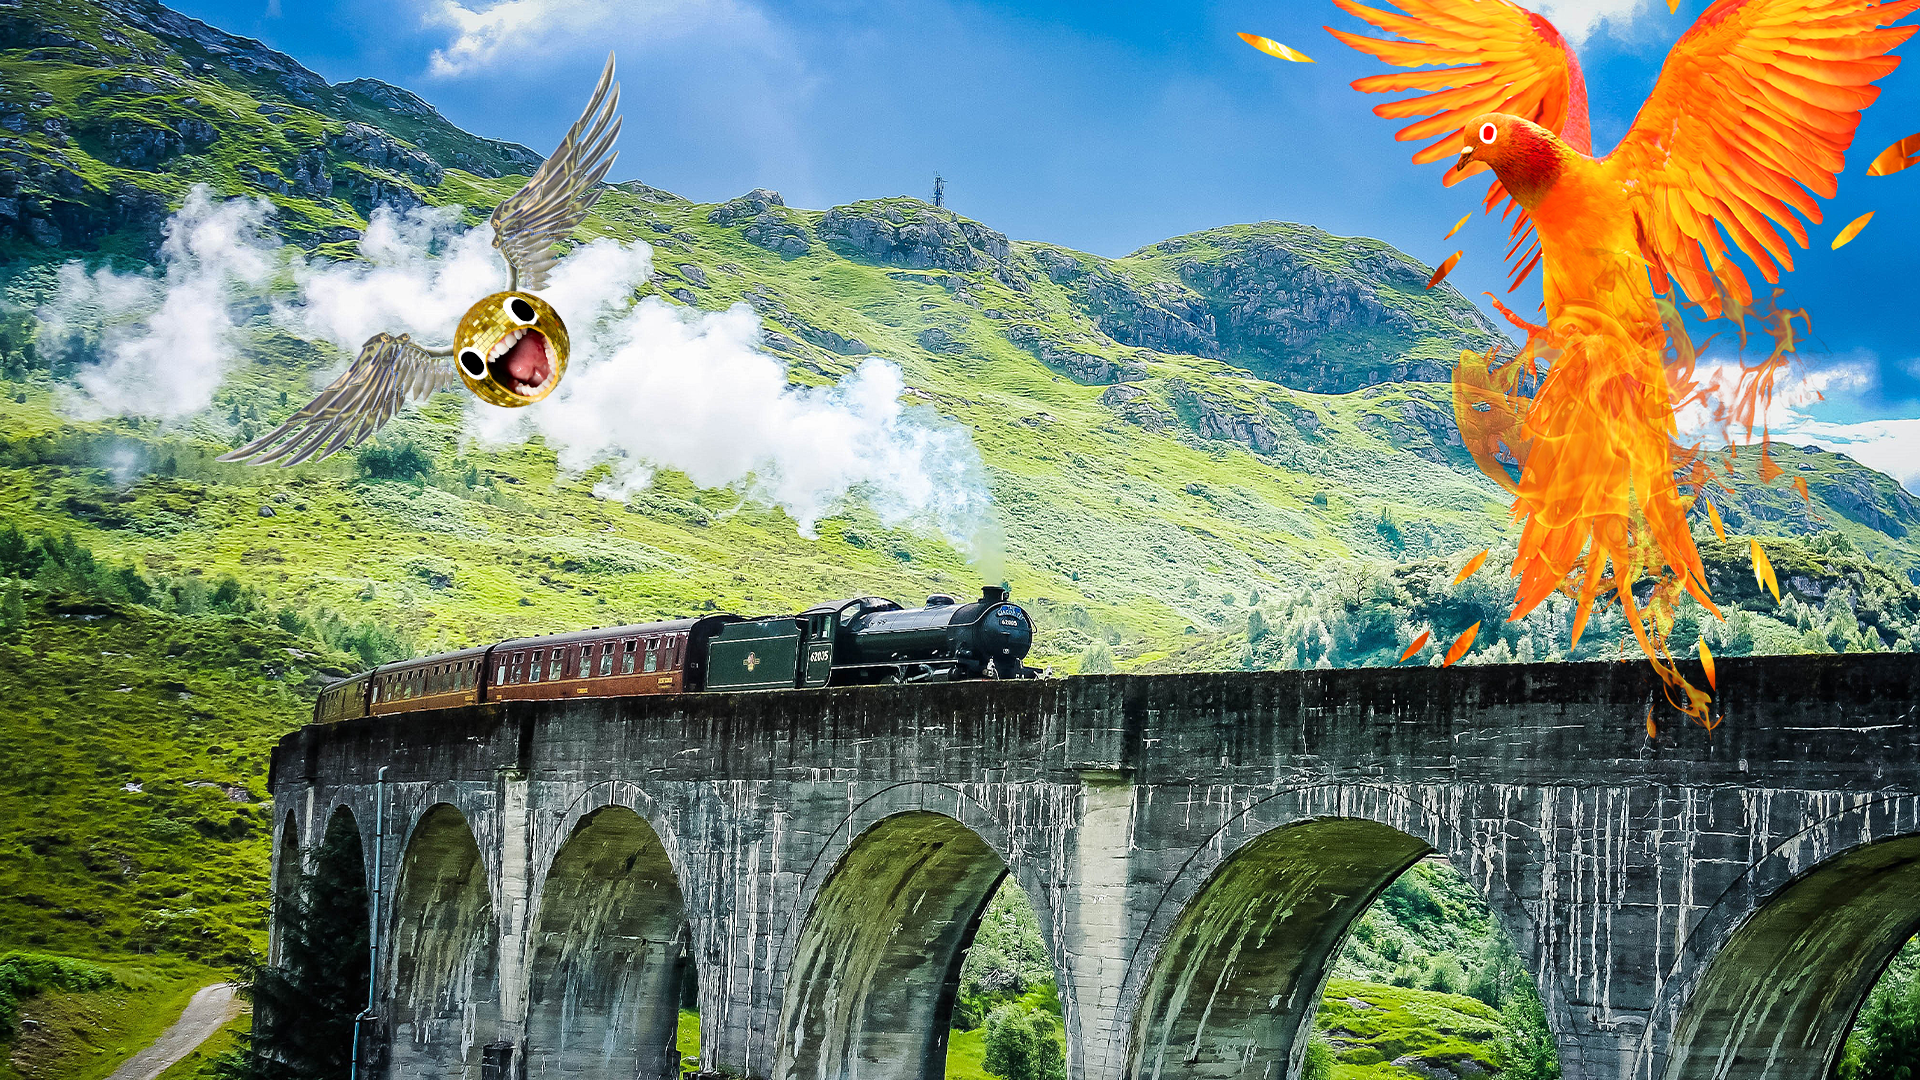 Steam train on viaduct with screaming snitch and phoenix